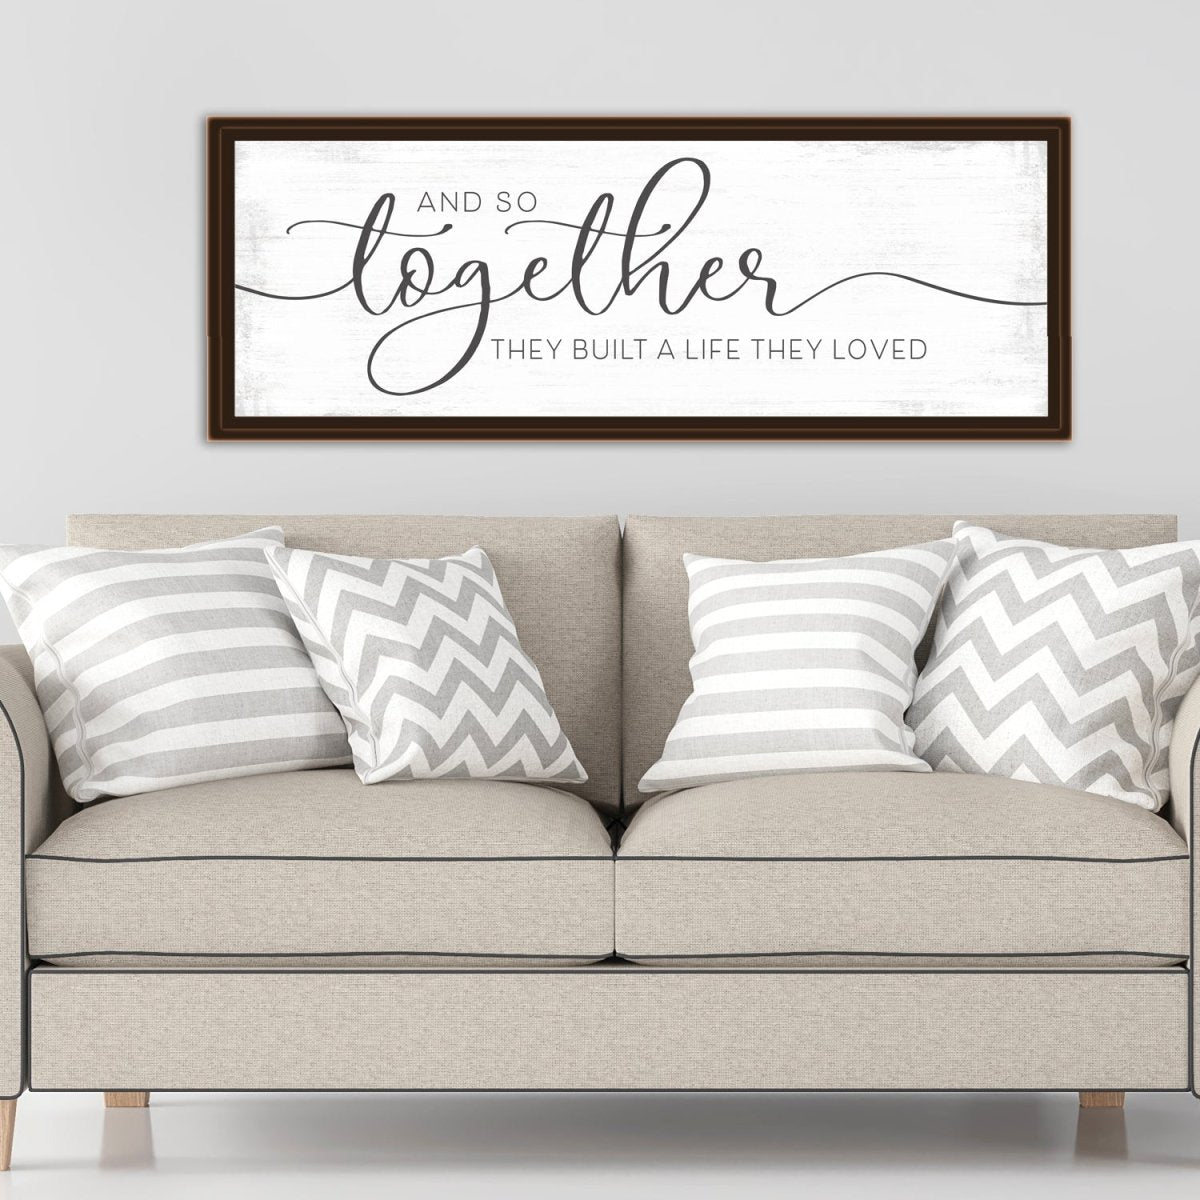 And So Together They Built A Life They Loved Canvas Sign in Living Room - Pretty Perfect Studio